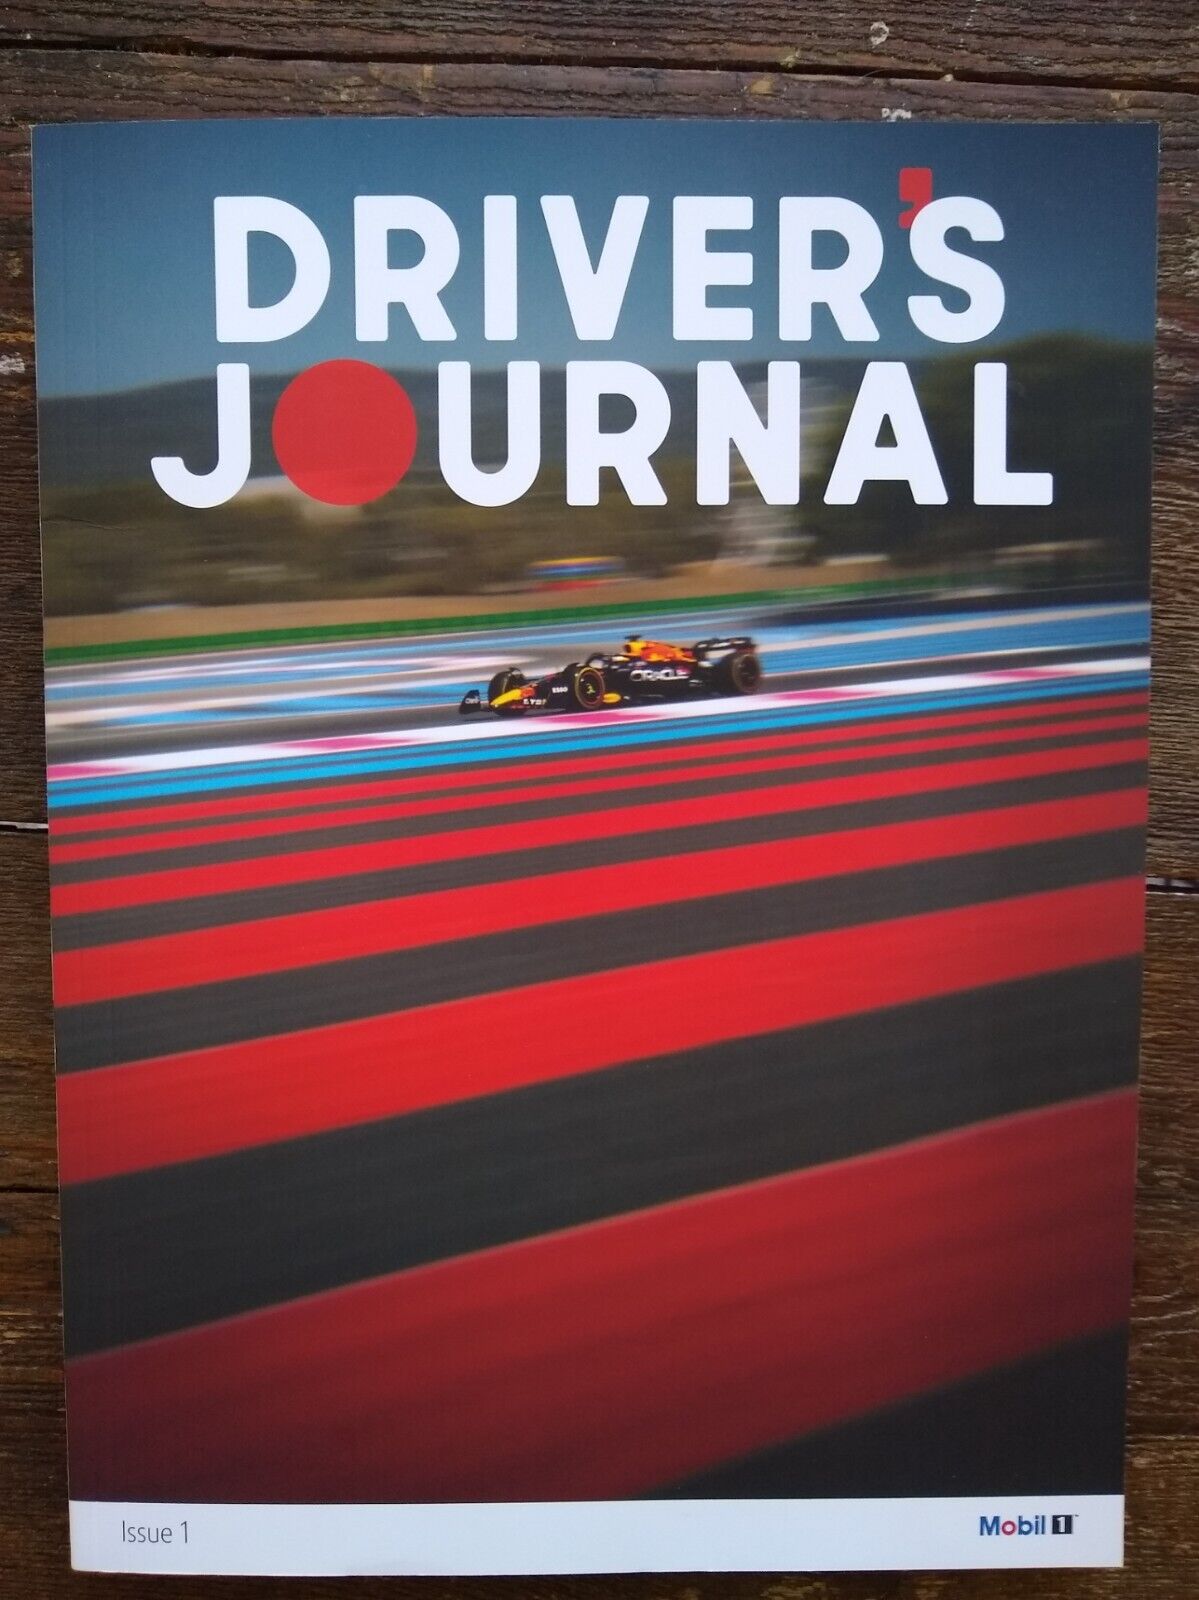 NEW Driver's Journal Mobile 1 - Issue 1 Red Bull Formula One - Limited Edition